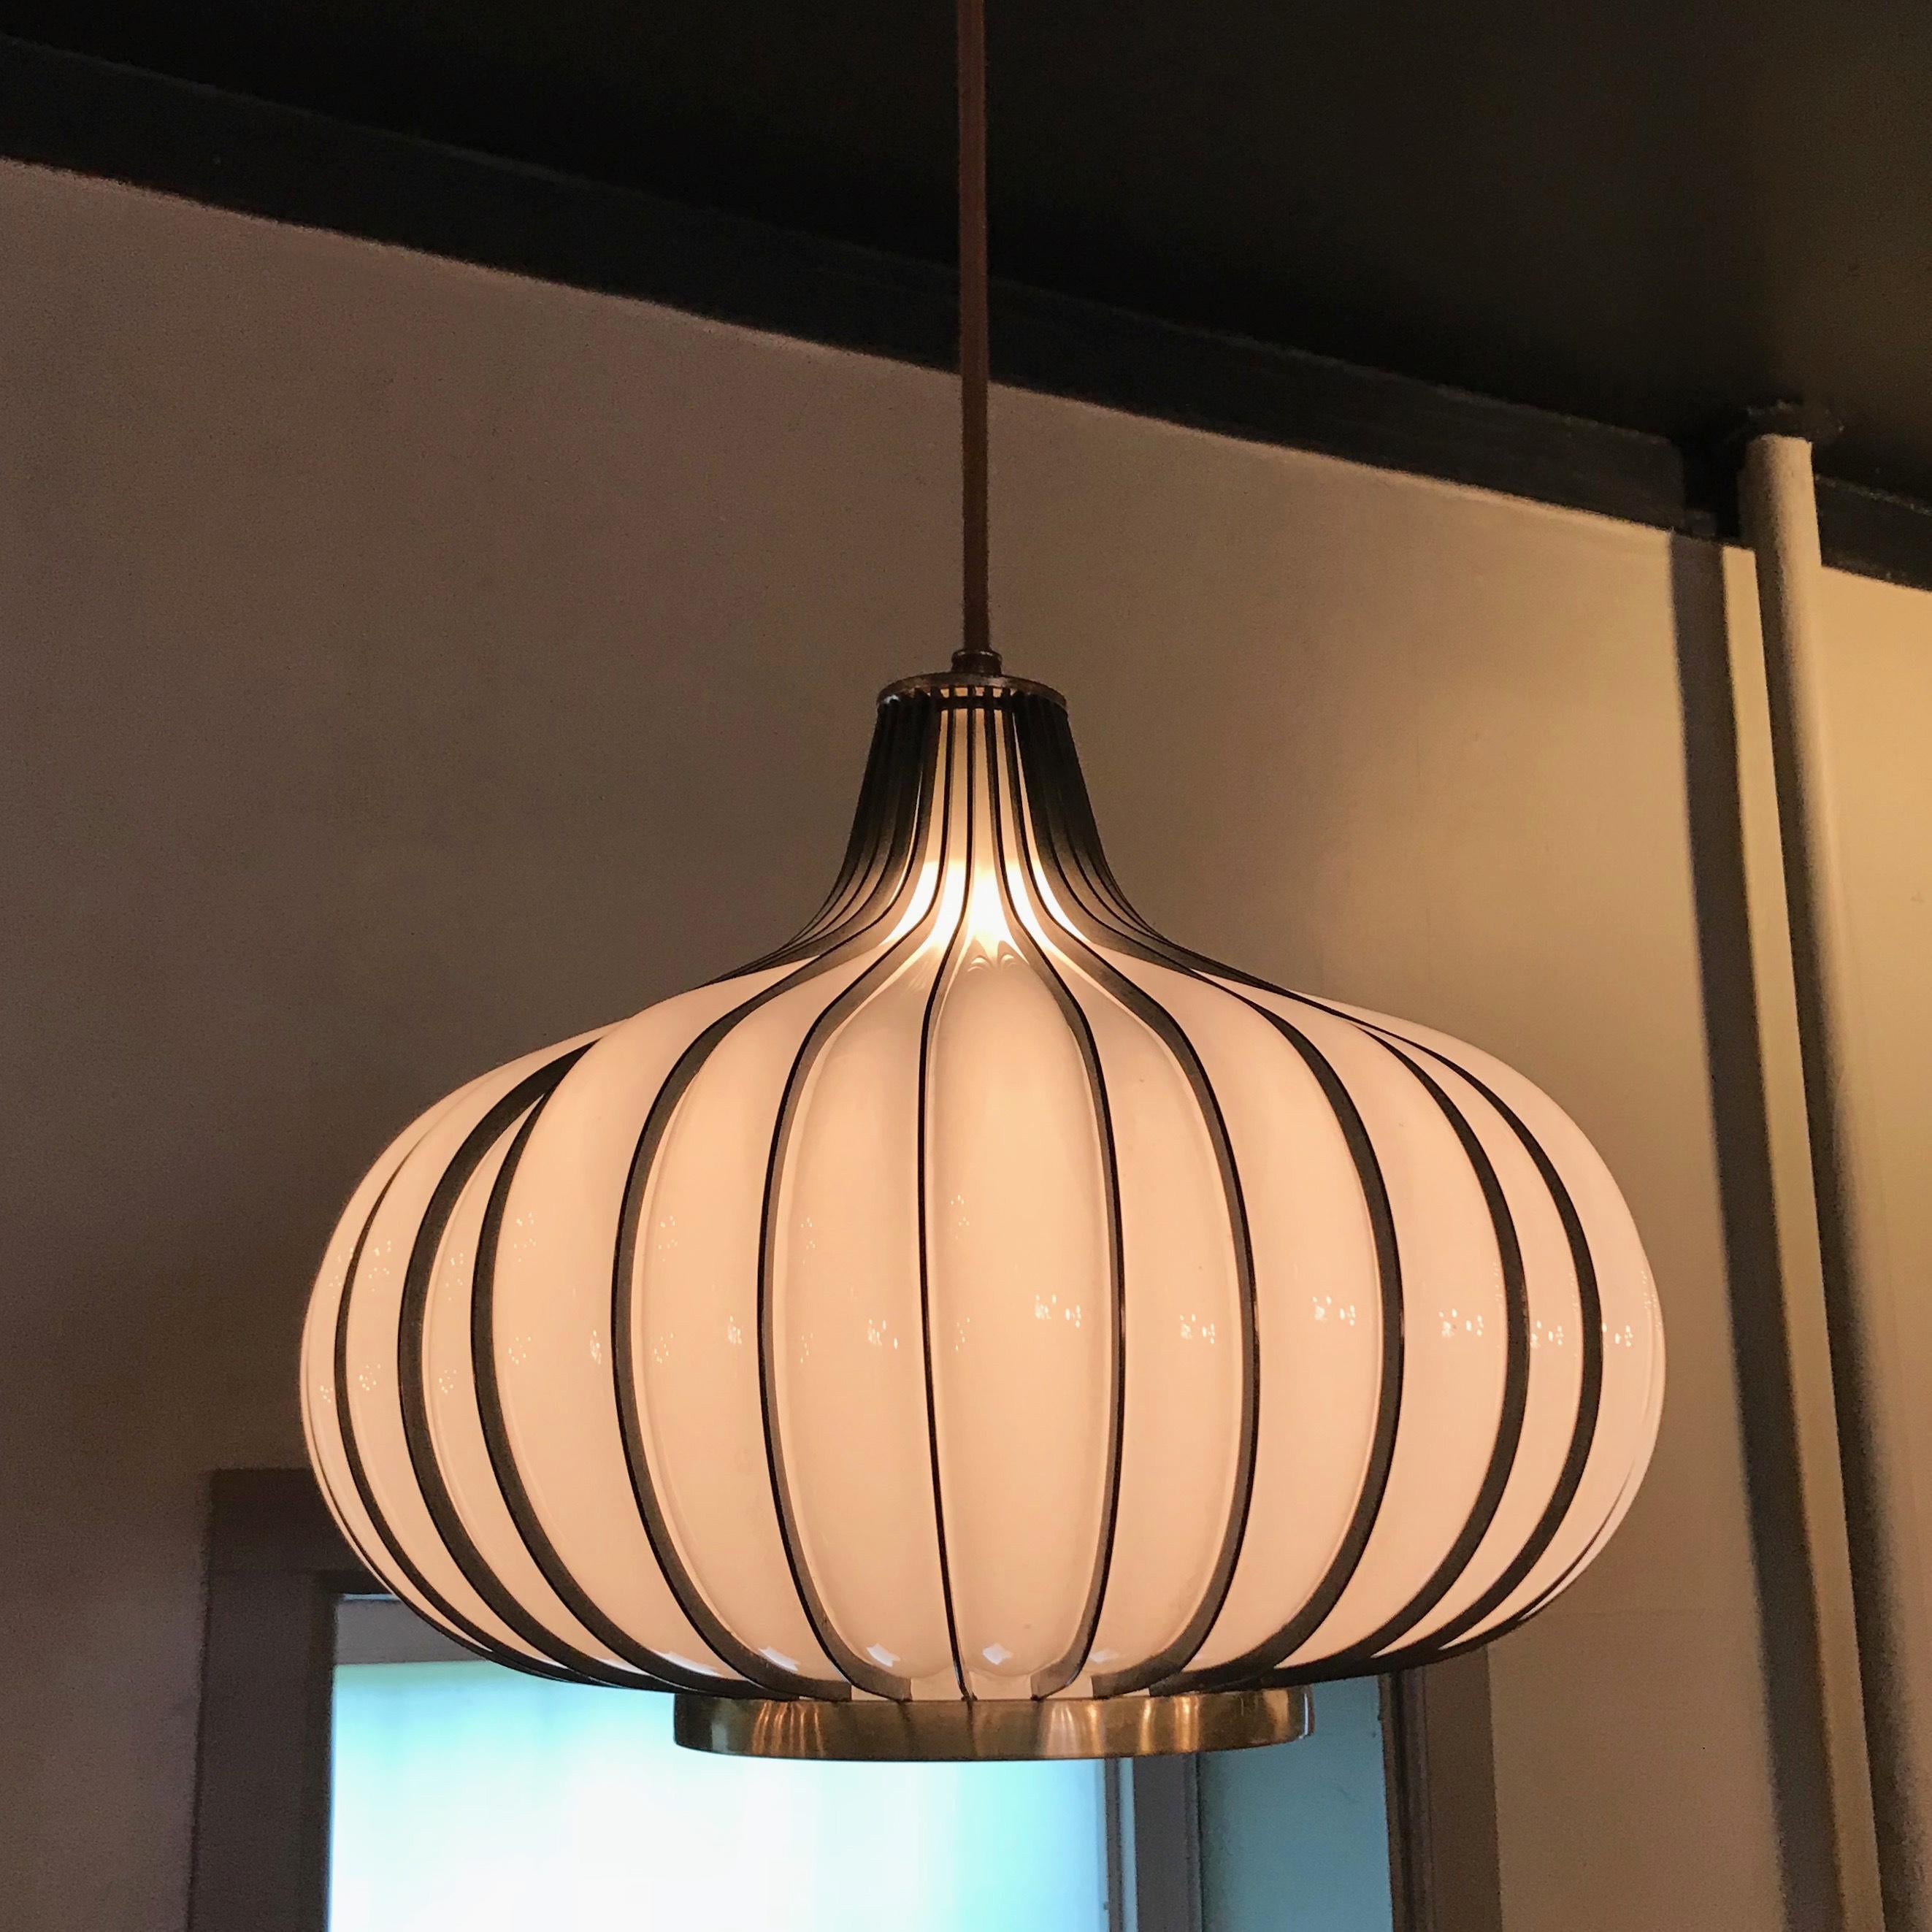 Midcentury, Hollywood Regency, garlic or onion shaped, swag, pendant light features a blown milk glass shade encased in a brass-toned, steel frame. The pendant is newly wired with 6 feet of thick brown cloth cord.